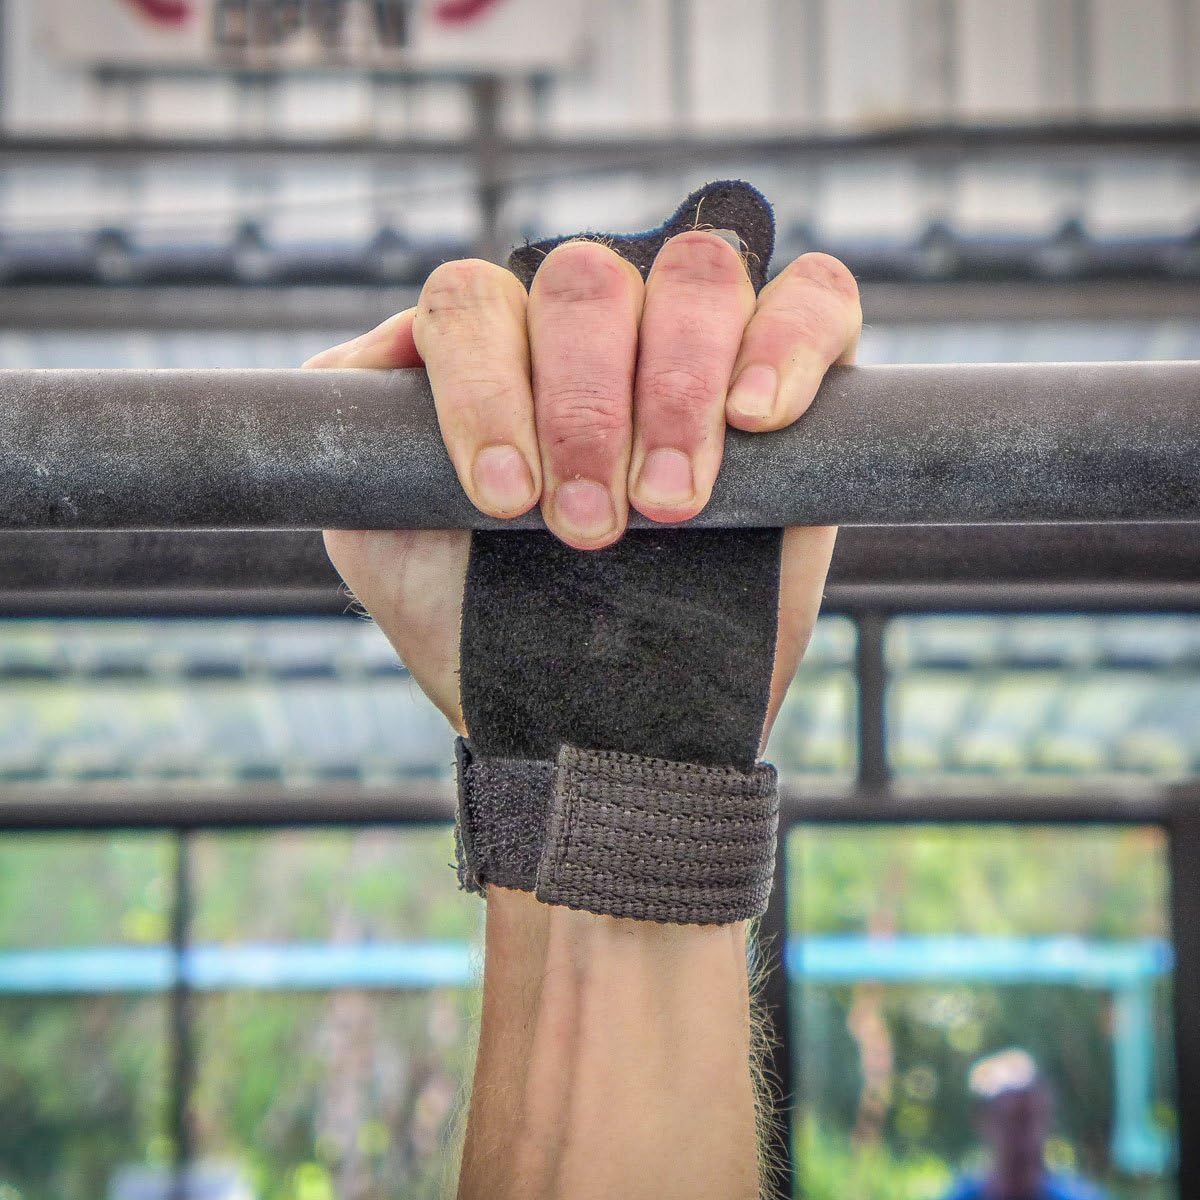 WOD Nation Barbell Gymnastics Grips Review